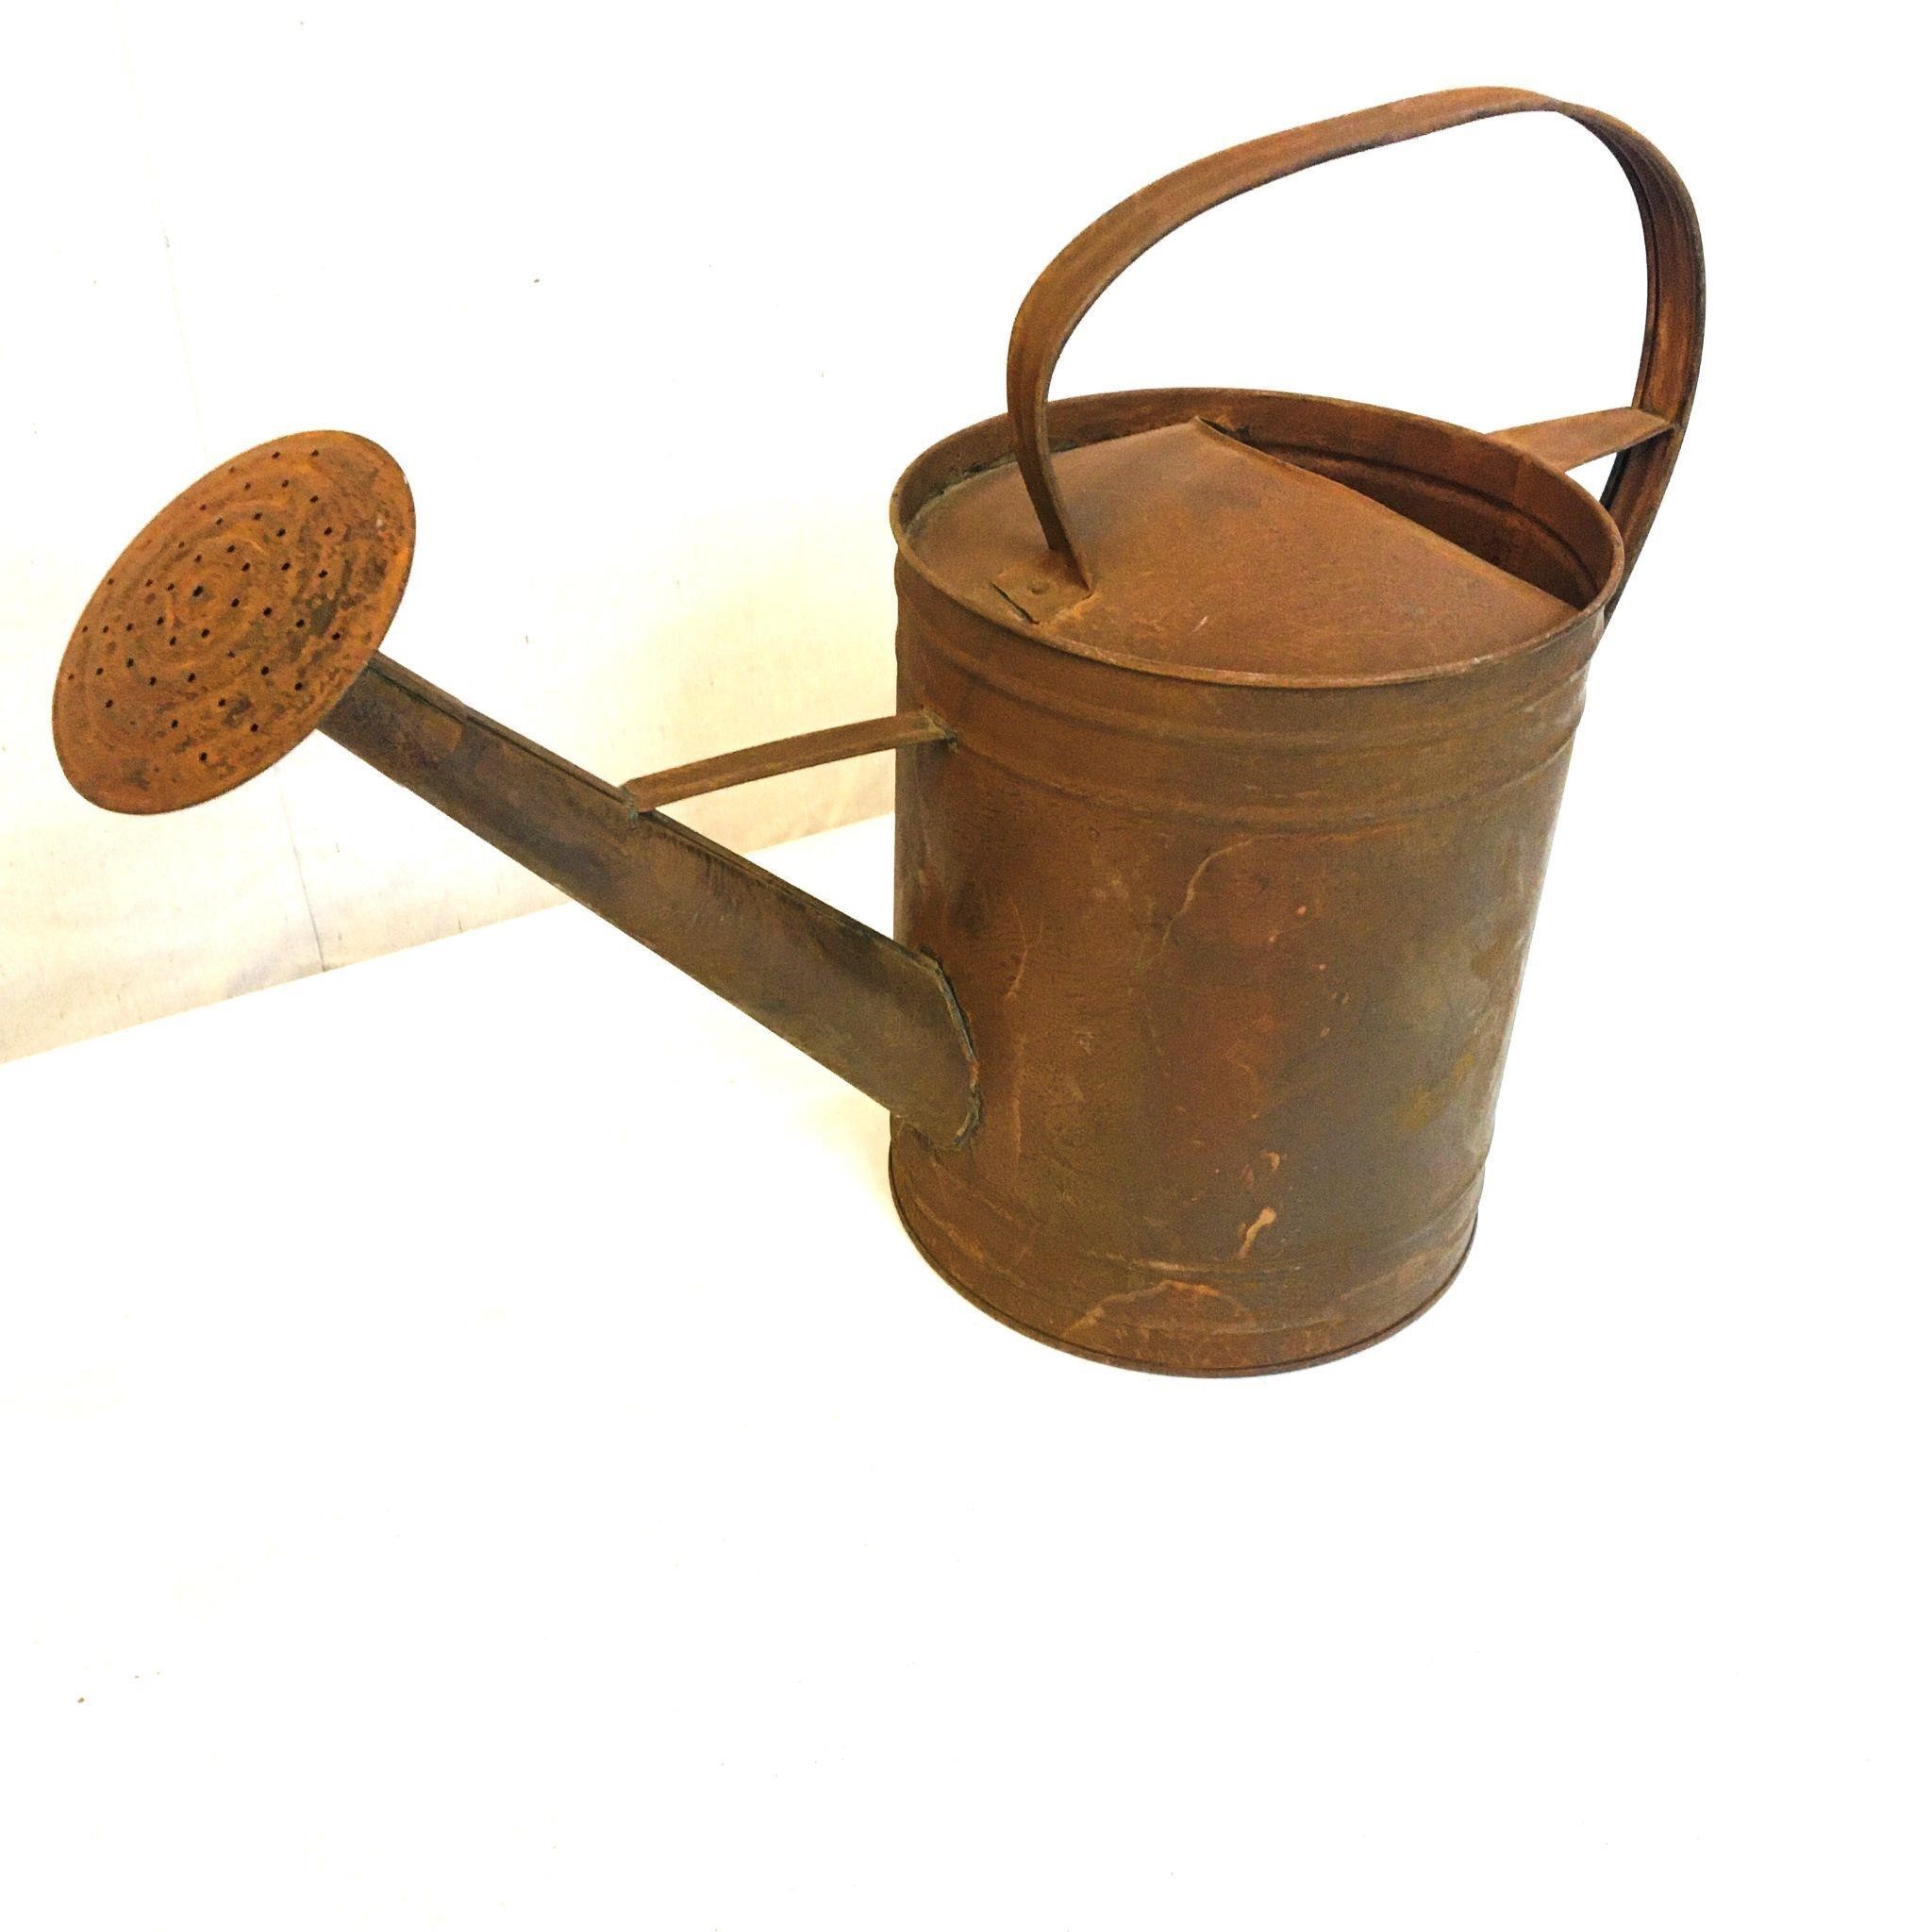 Rustic Watering Can